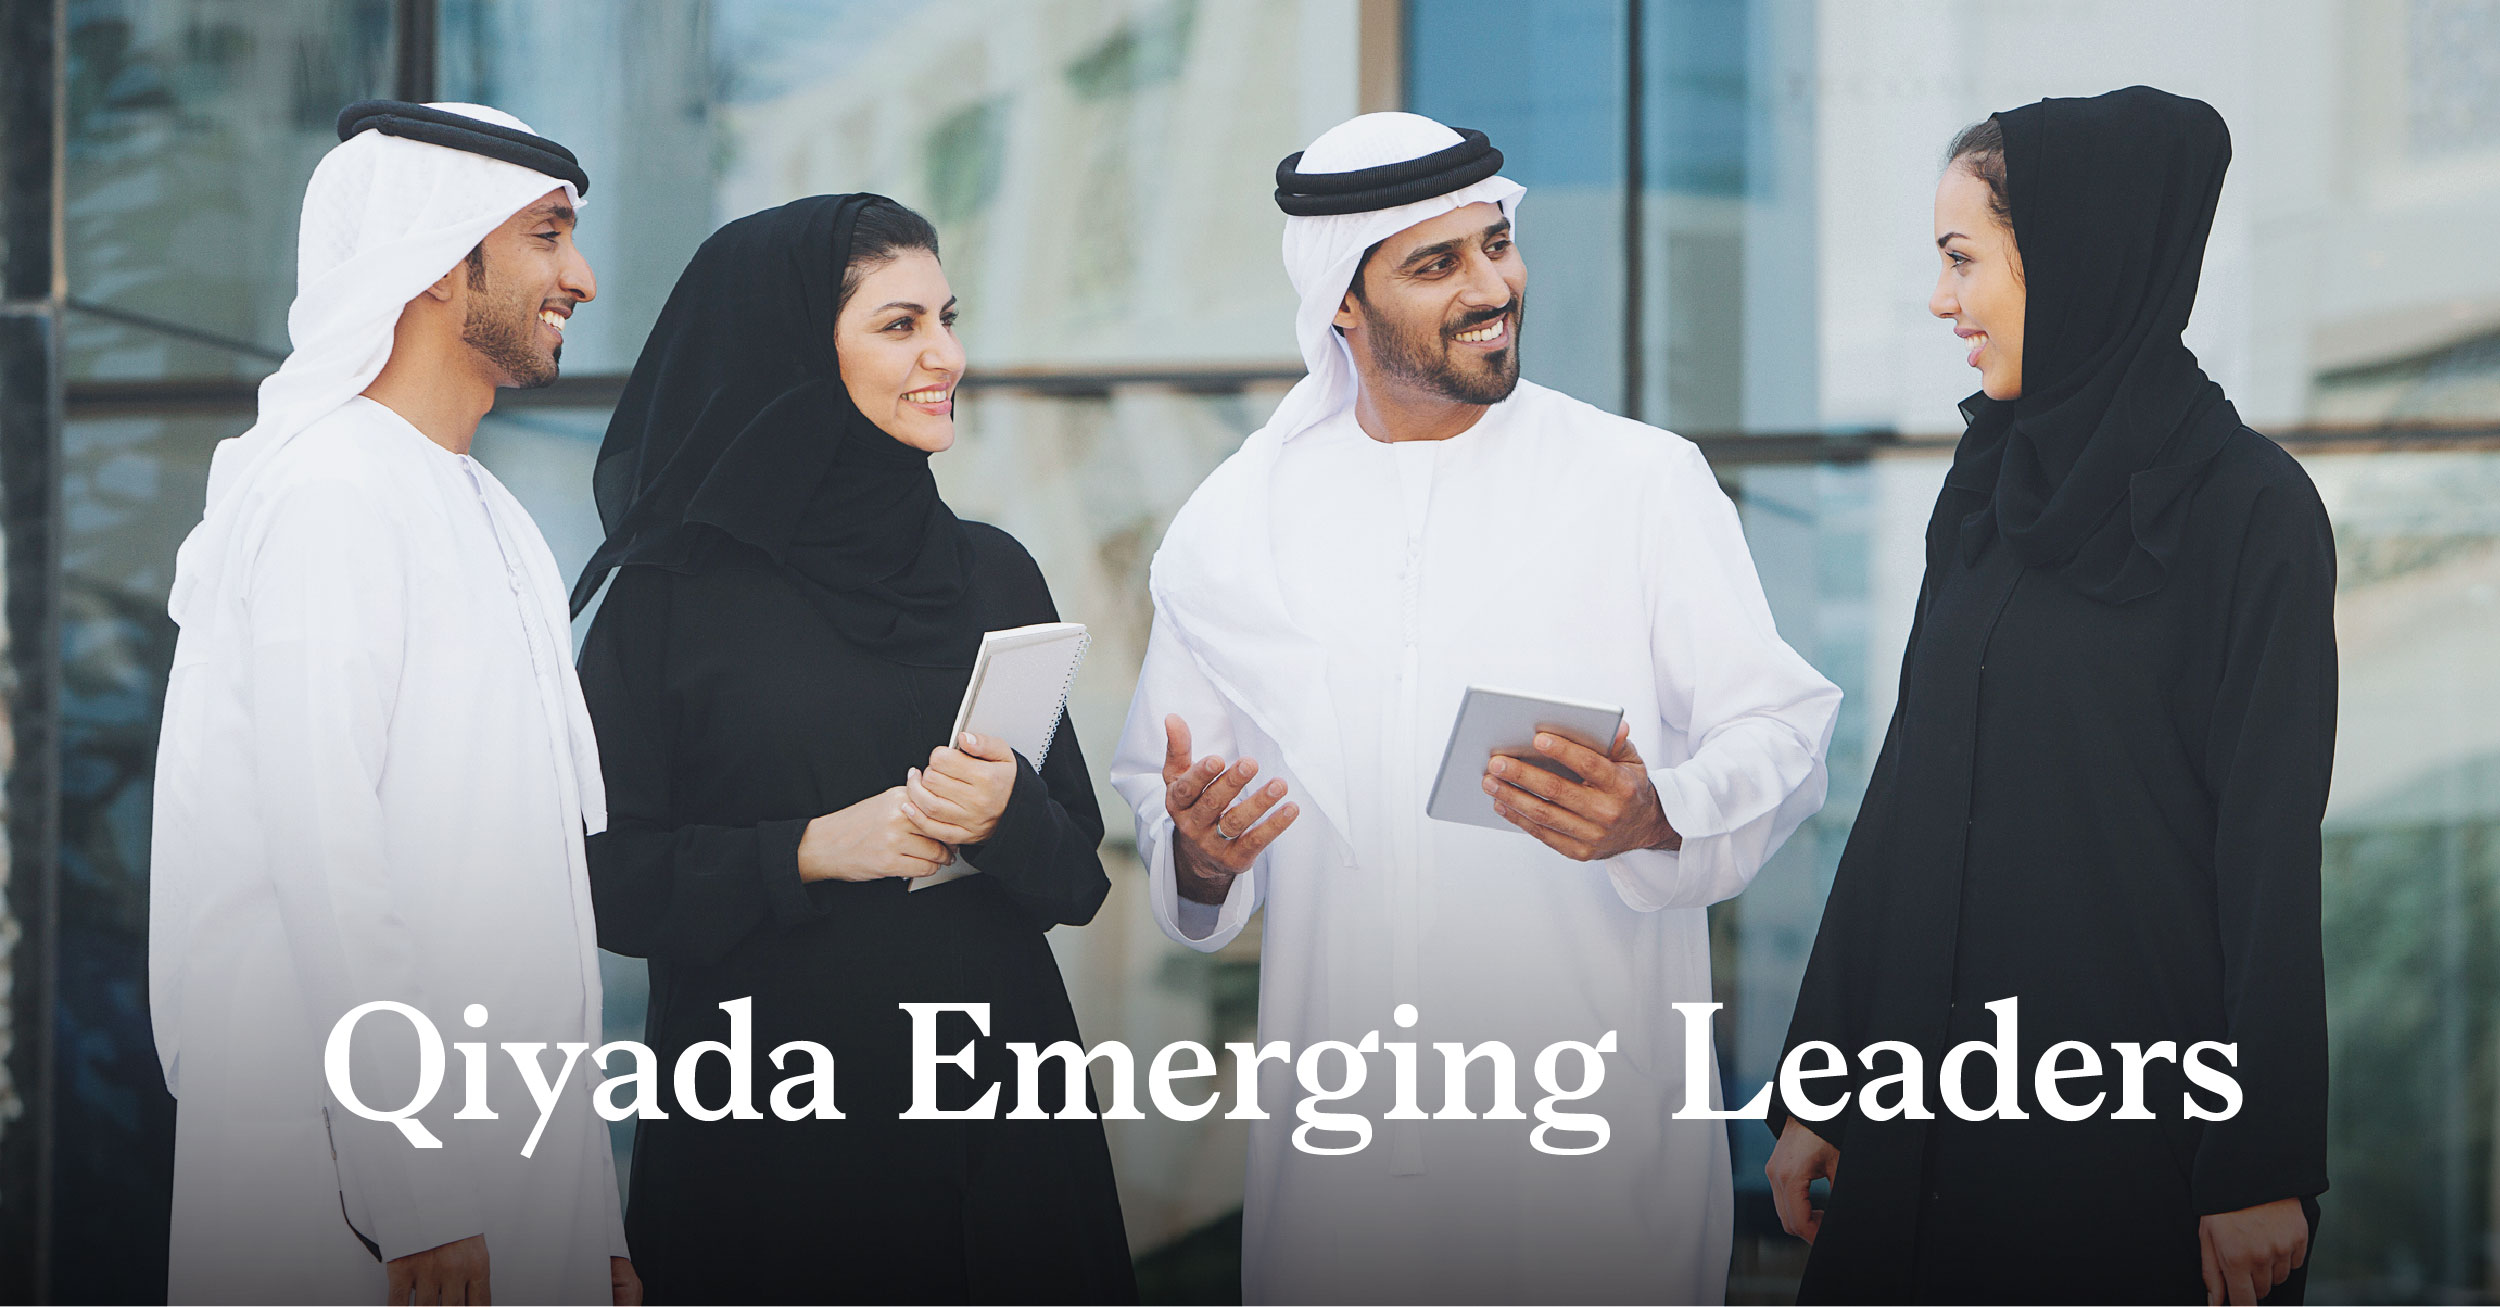 Image for McKinsey & Company Launches Second Edition Of Qiyada Emerging Leaders Program To Upskill Emirati Leaders